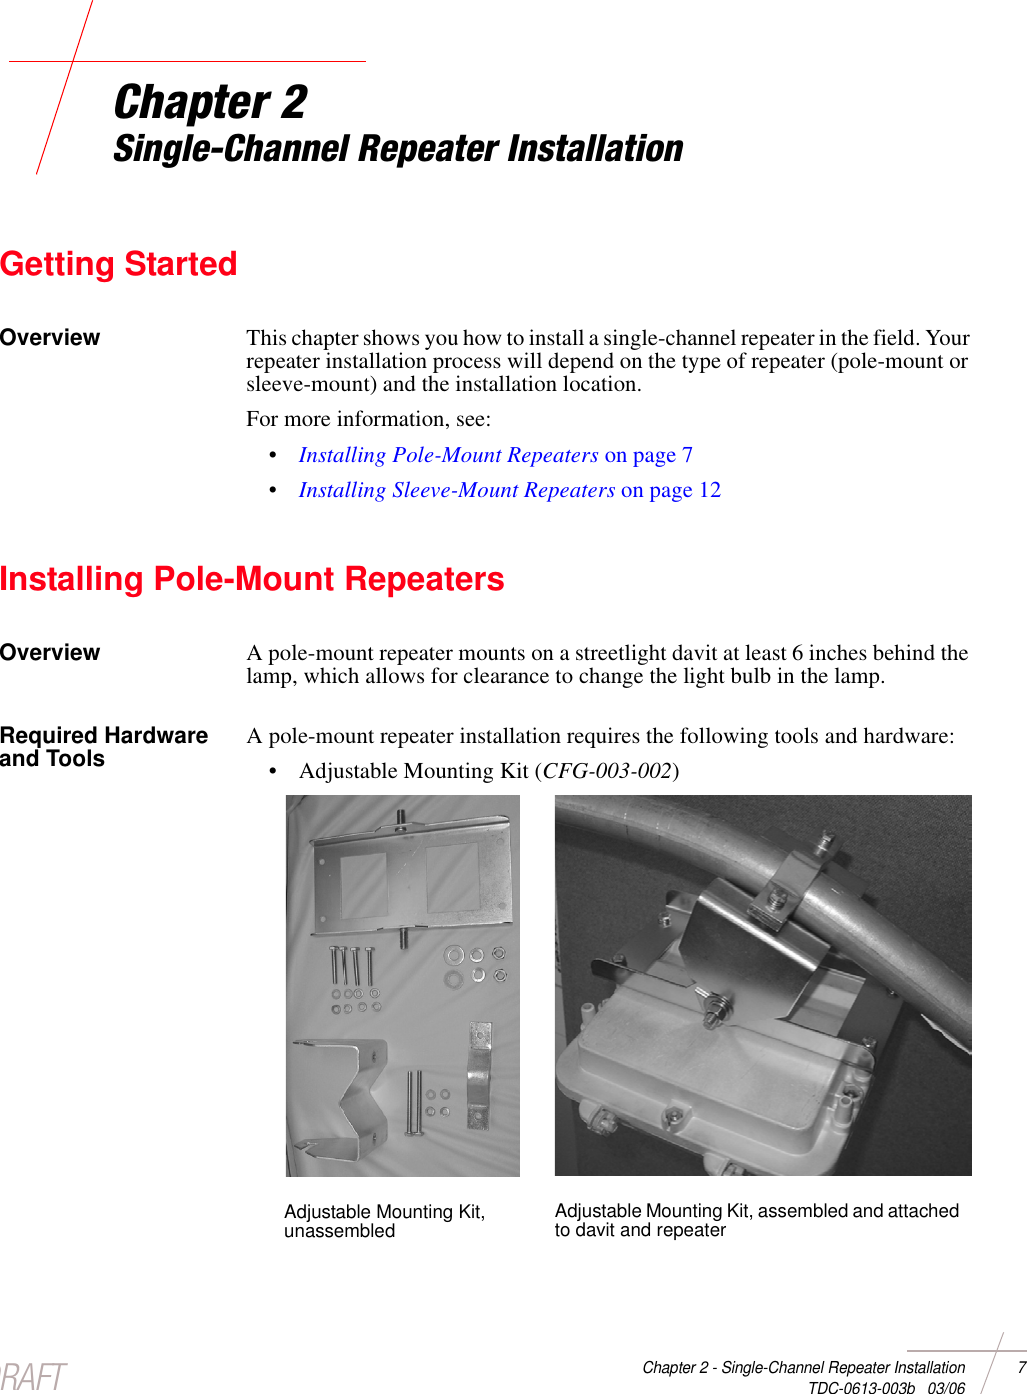 DRAFTChapter 2 - Single-Channel Repeater Installation 7 TDC-0613-003b   03/06Chapter 2Single-Channel Repeater InstallationGetting StartedOverview This chapter shows you how to install a single-channel repeater in the field. Your repeater installation process will depend on the type of repeater (pole-mount or sleeve-mount) and the installation location. For more information, see: •Installing Pole-Mount Repeaters on page 7•Installing Sleeve-Mount Repeaters on page 12Installing Pole-Mount RepeatersOverview A pole-mount repeater mounts on a streetlight davit at least 6 inches behind the lamp, which allows for clearance to change the light bulb in the lamp. Required Hardware and Tools A pole-mount repeater installation requires the following tools and hardware:• Adjustable Mounting Kit (CFG-003-002) Adjustable Mounting Kit, unassembled Adjustable Mounting Kit, assembled and attached to davit and repeater